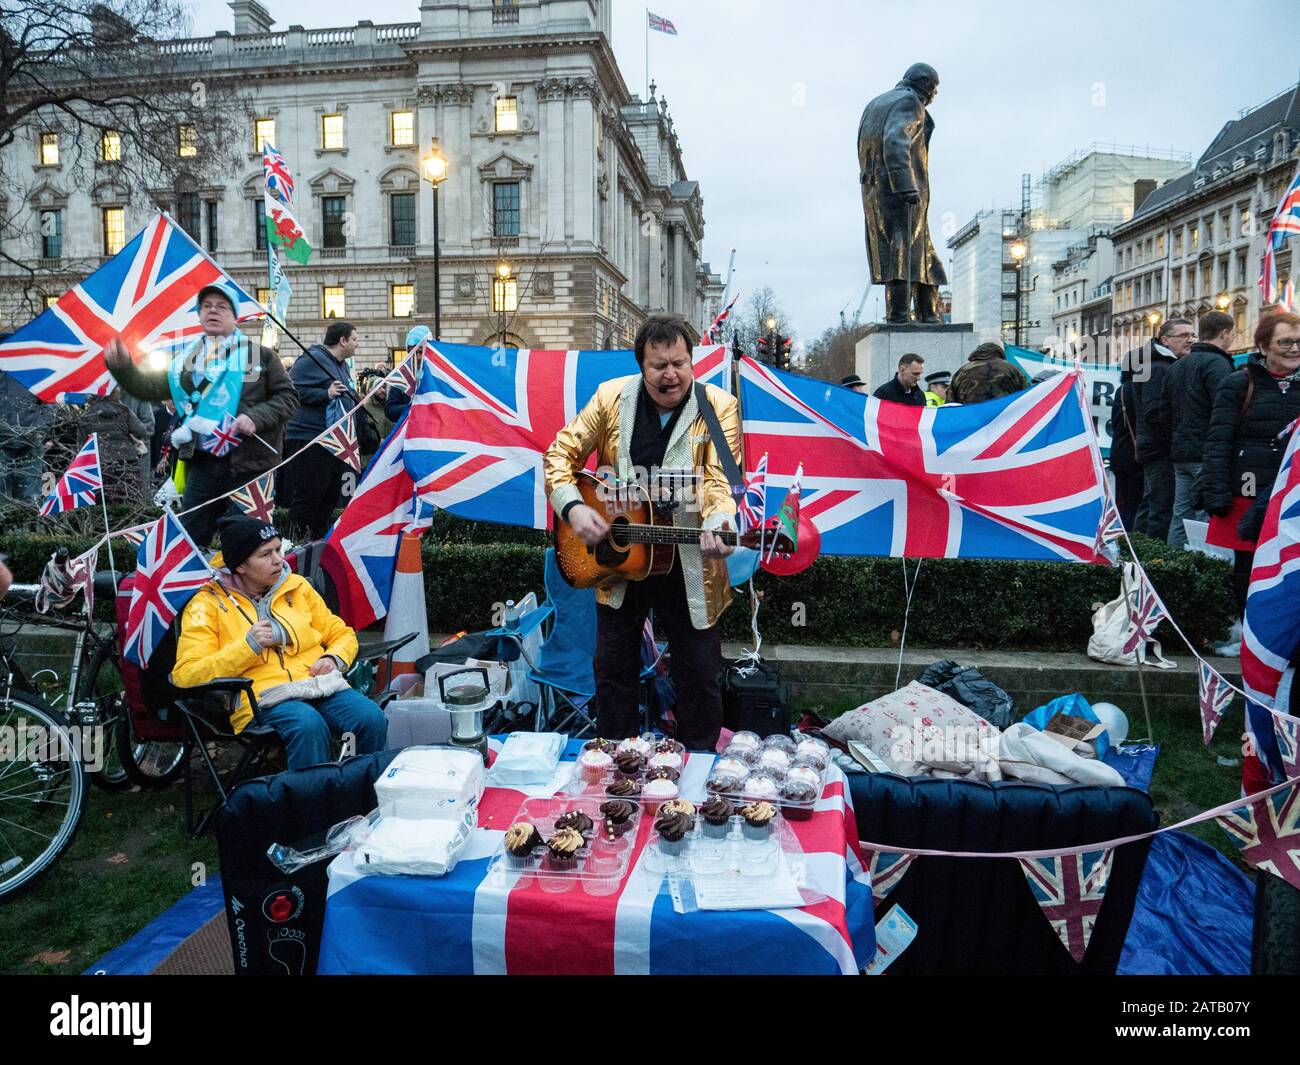 Brexit day 31st Jan 2020  in Parliament square, London, England. A man sings and plays the guitar. Stock Photo